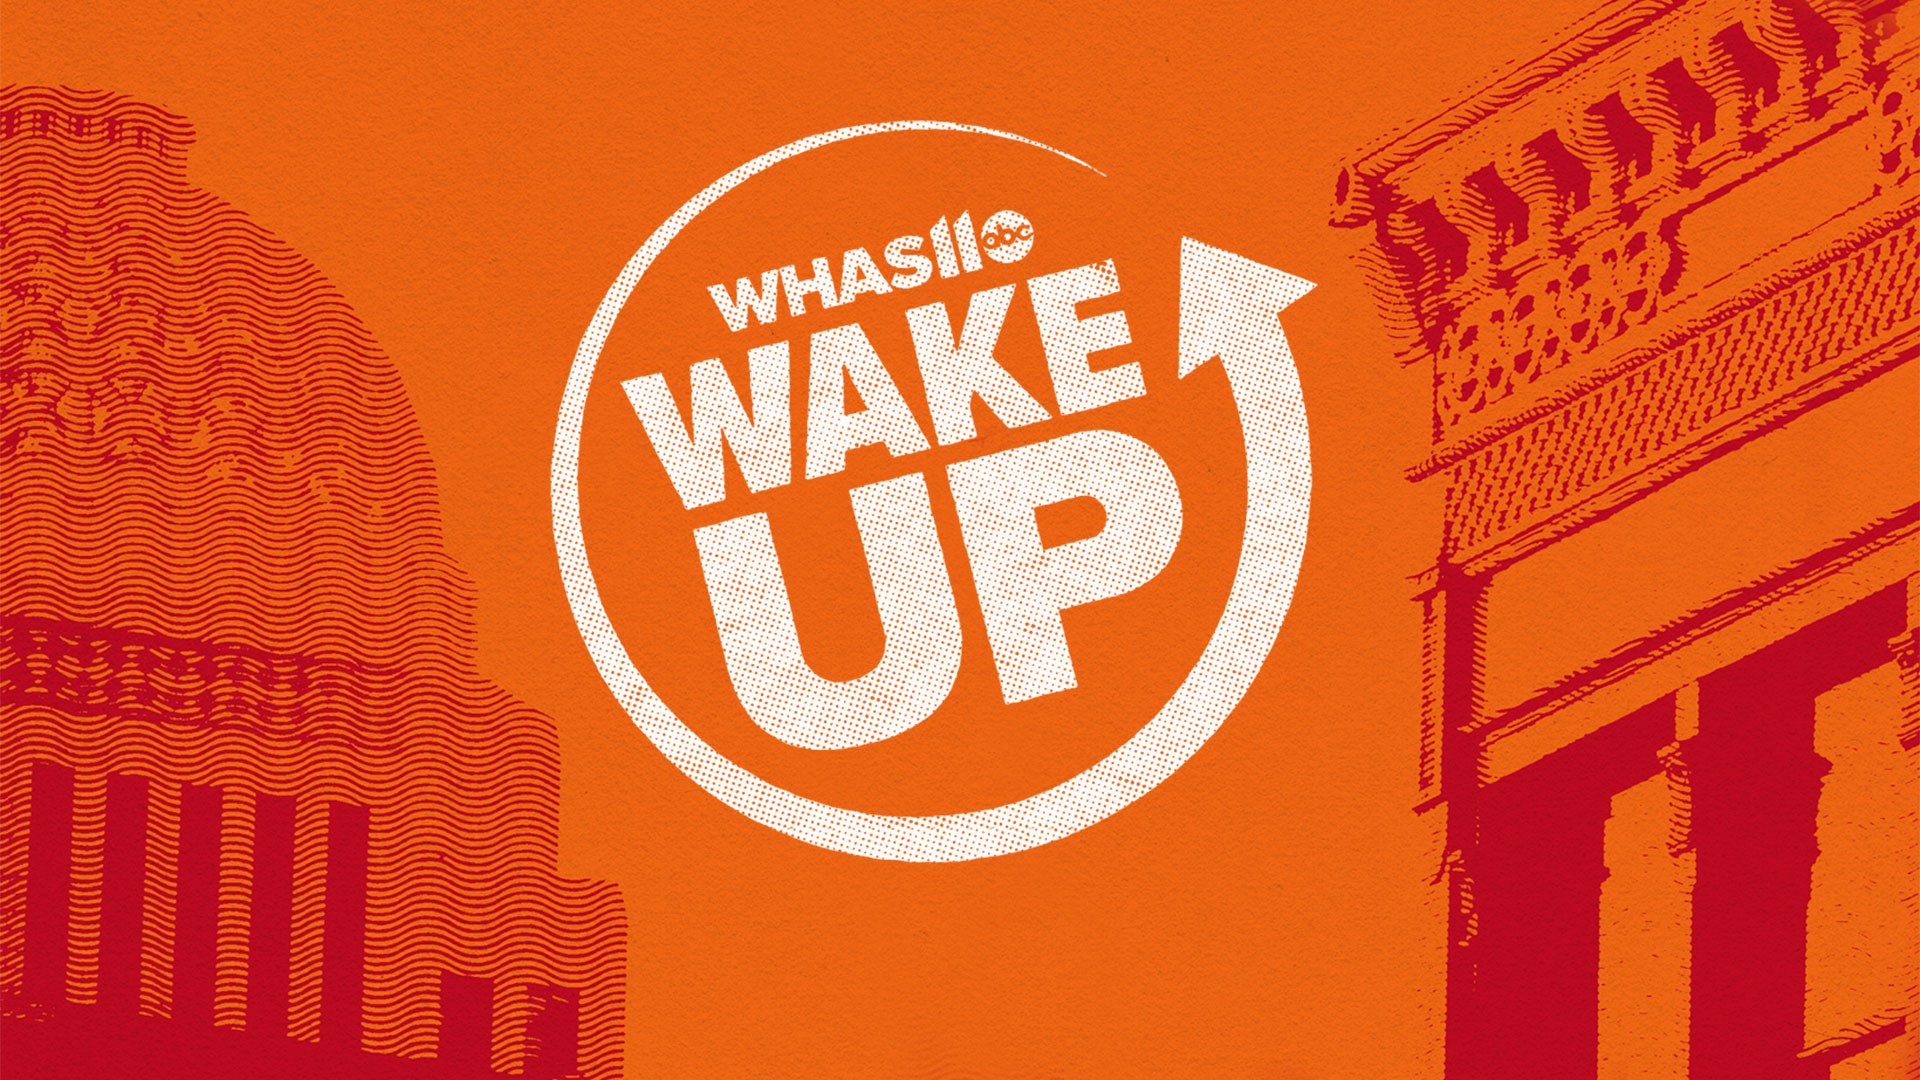 Our morning team has been working hard to create something special for you. 'Wake Up' launches on July 22 on WHAS11.